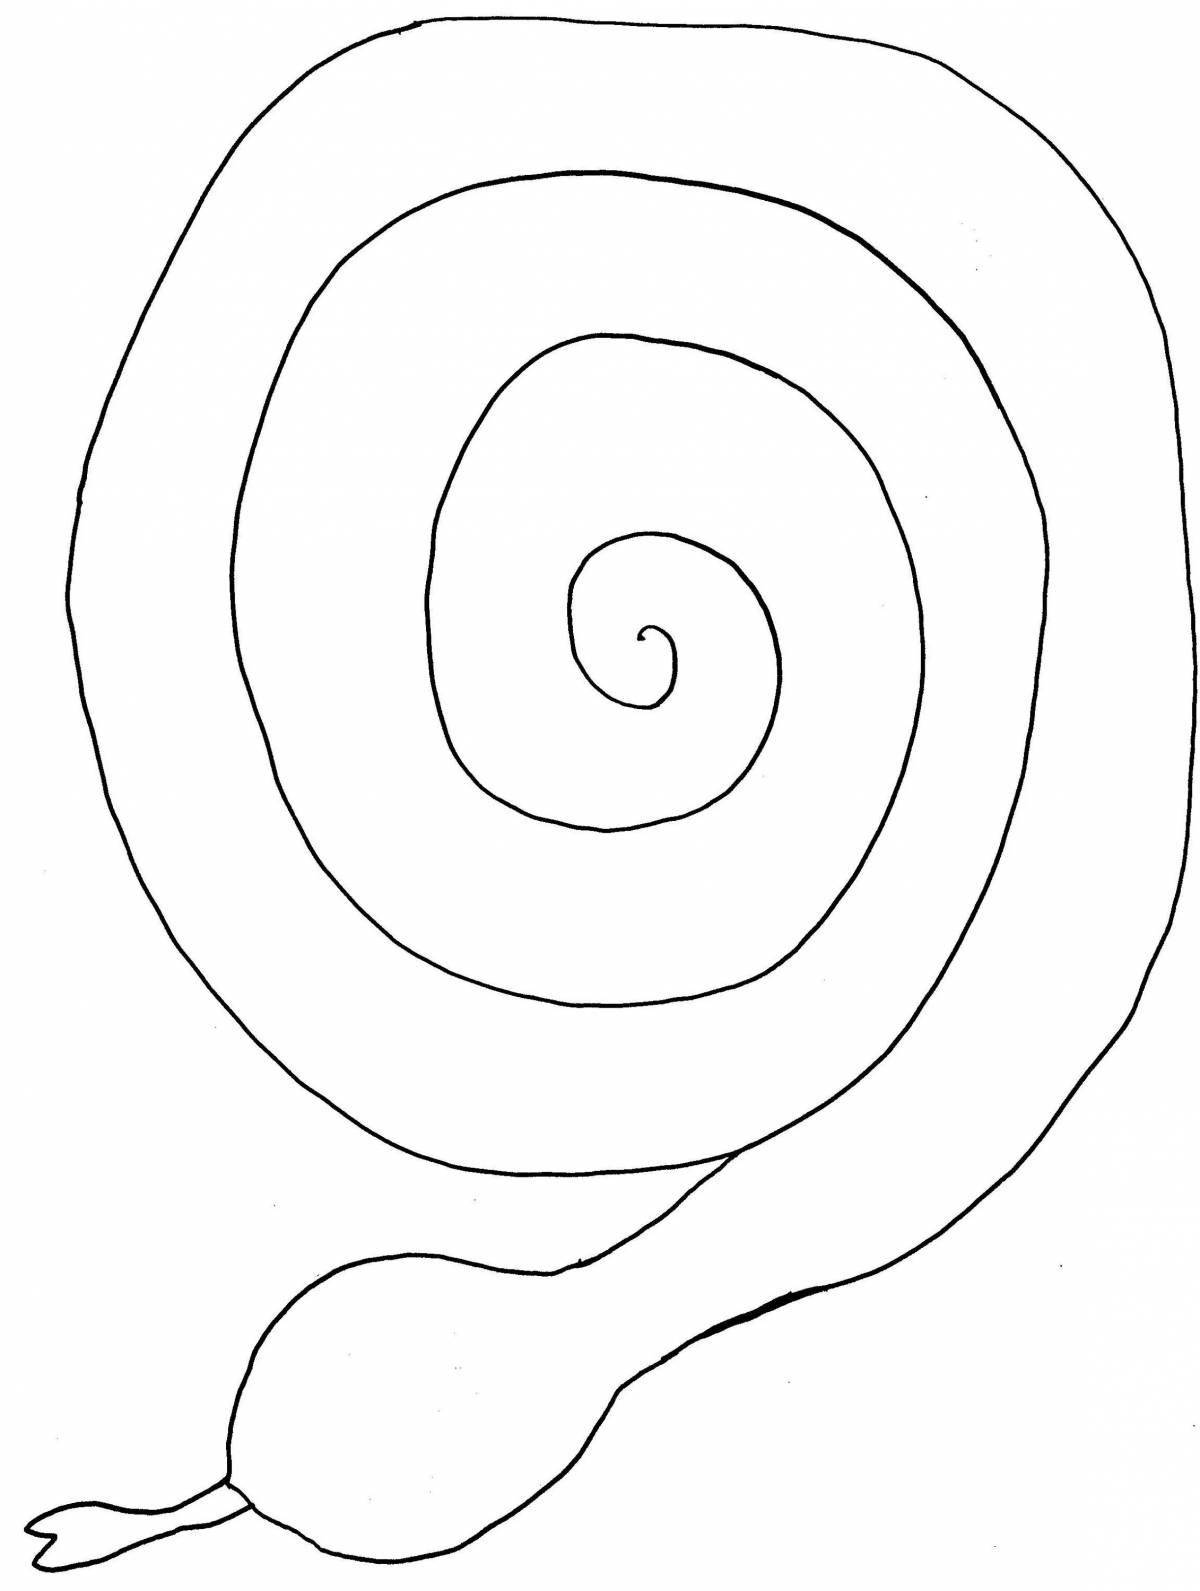 Colorful spiral mosaic coloring book for kids